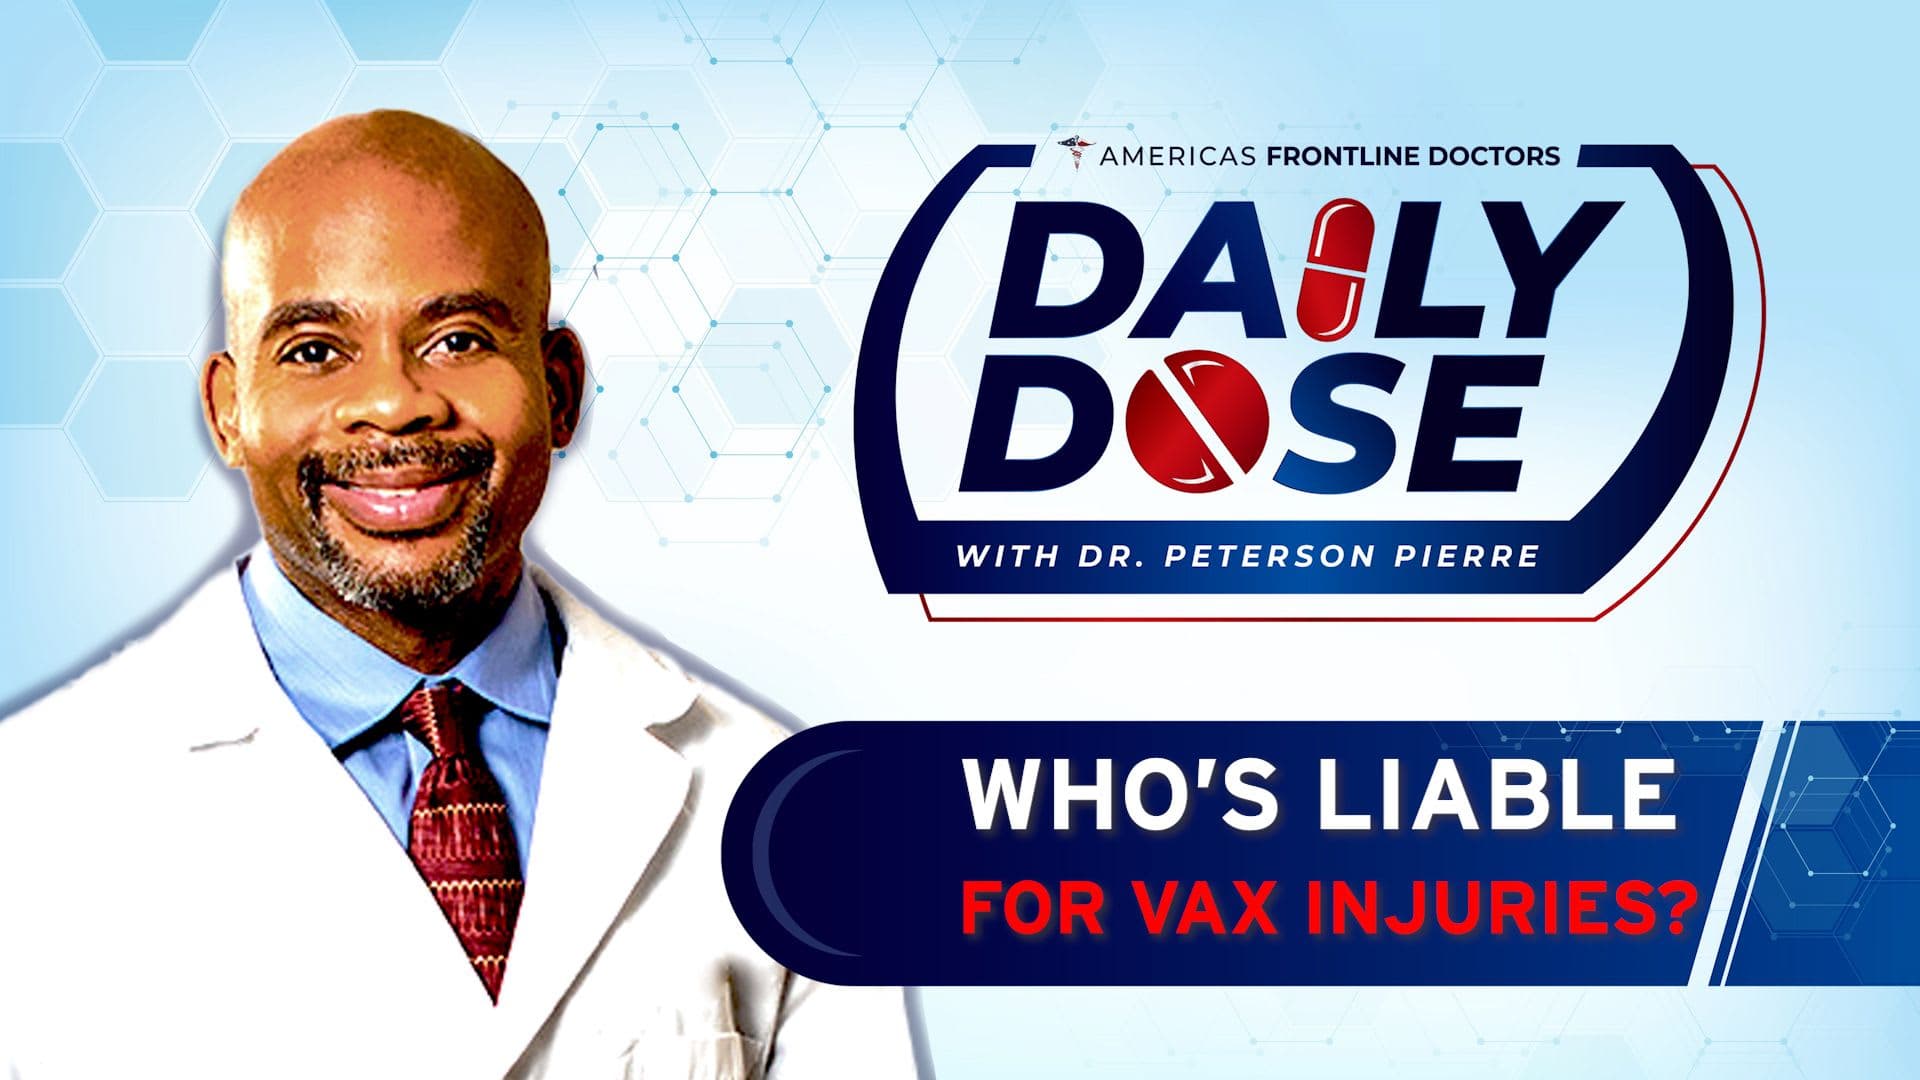 Daily Dose: 'Who's Liable for Vax Injuries?' with Dr. Peterson Pierre